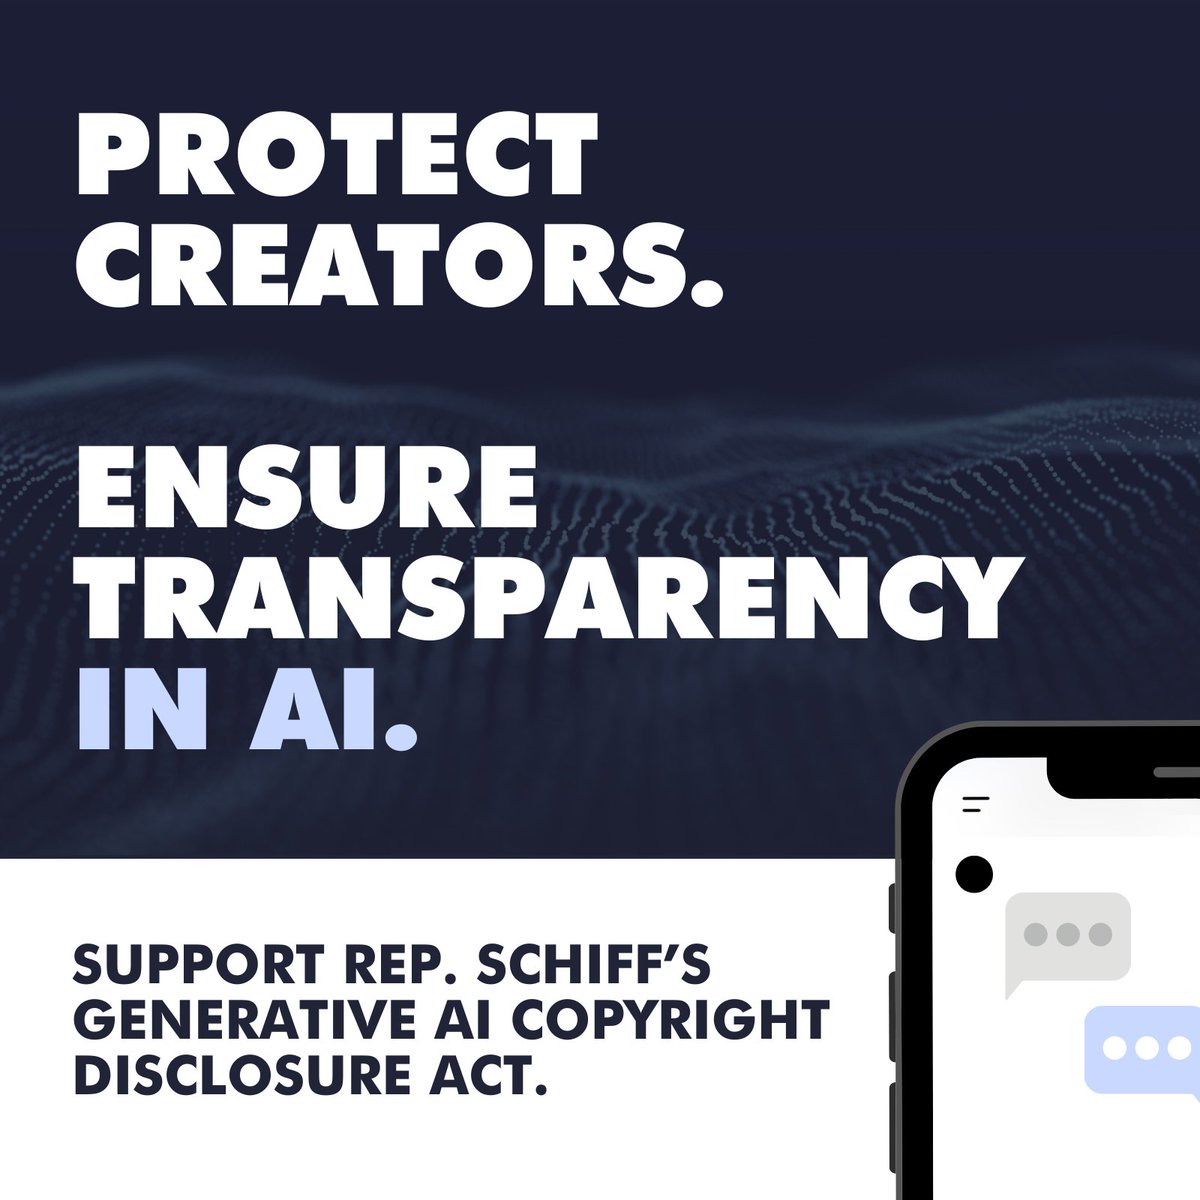 In the age of AI, protecting creative rights is more important than ever. The Generative AI Copyright Disclosure Act by @RepAdamSchiff is a critical step forward, and A2IM proudly supports it. #AI #ArtificialIntelligence